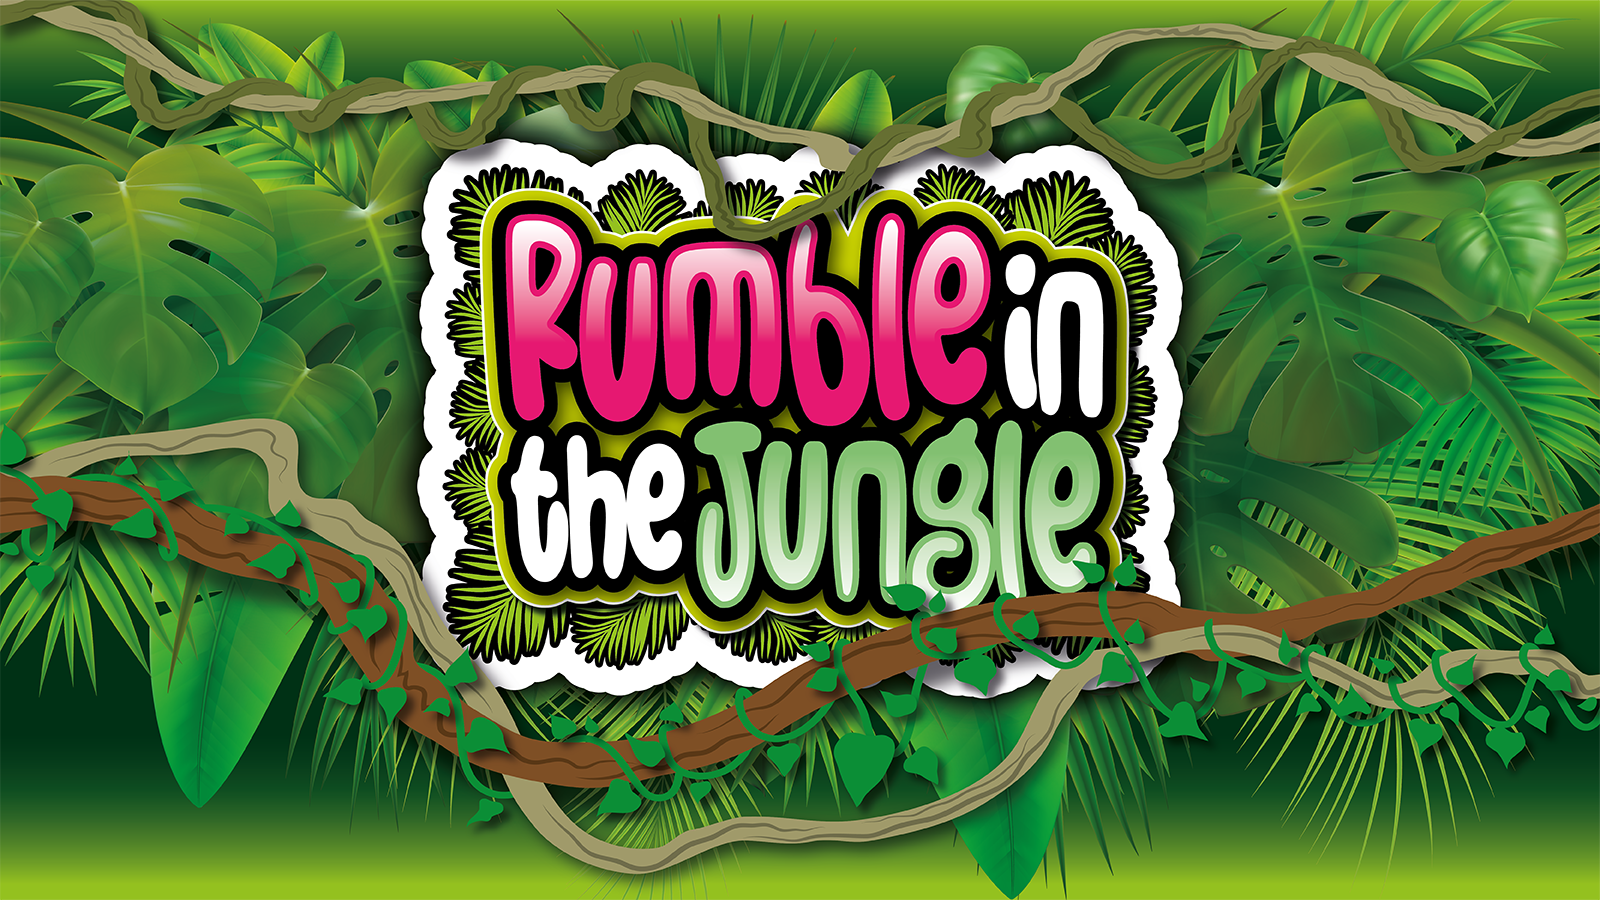 Rumble in the jungle